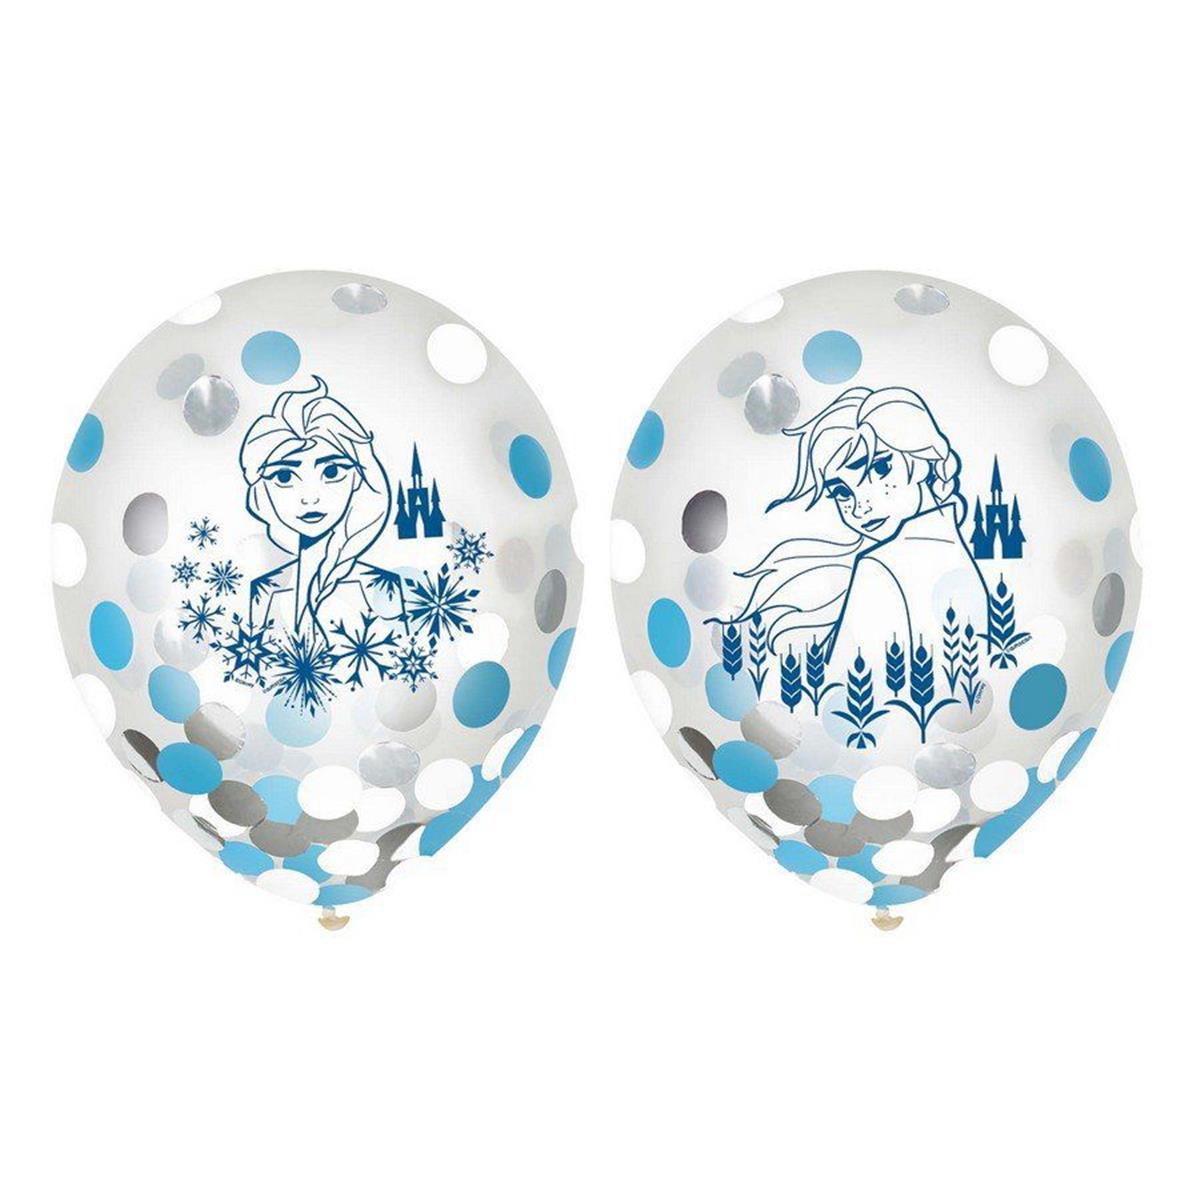 Picture of Amscan 622521 12 in. Frozen 2 Latex Confetti Balloon - 6 Count